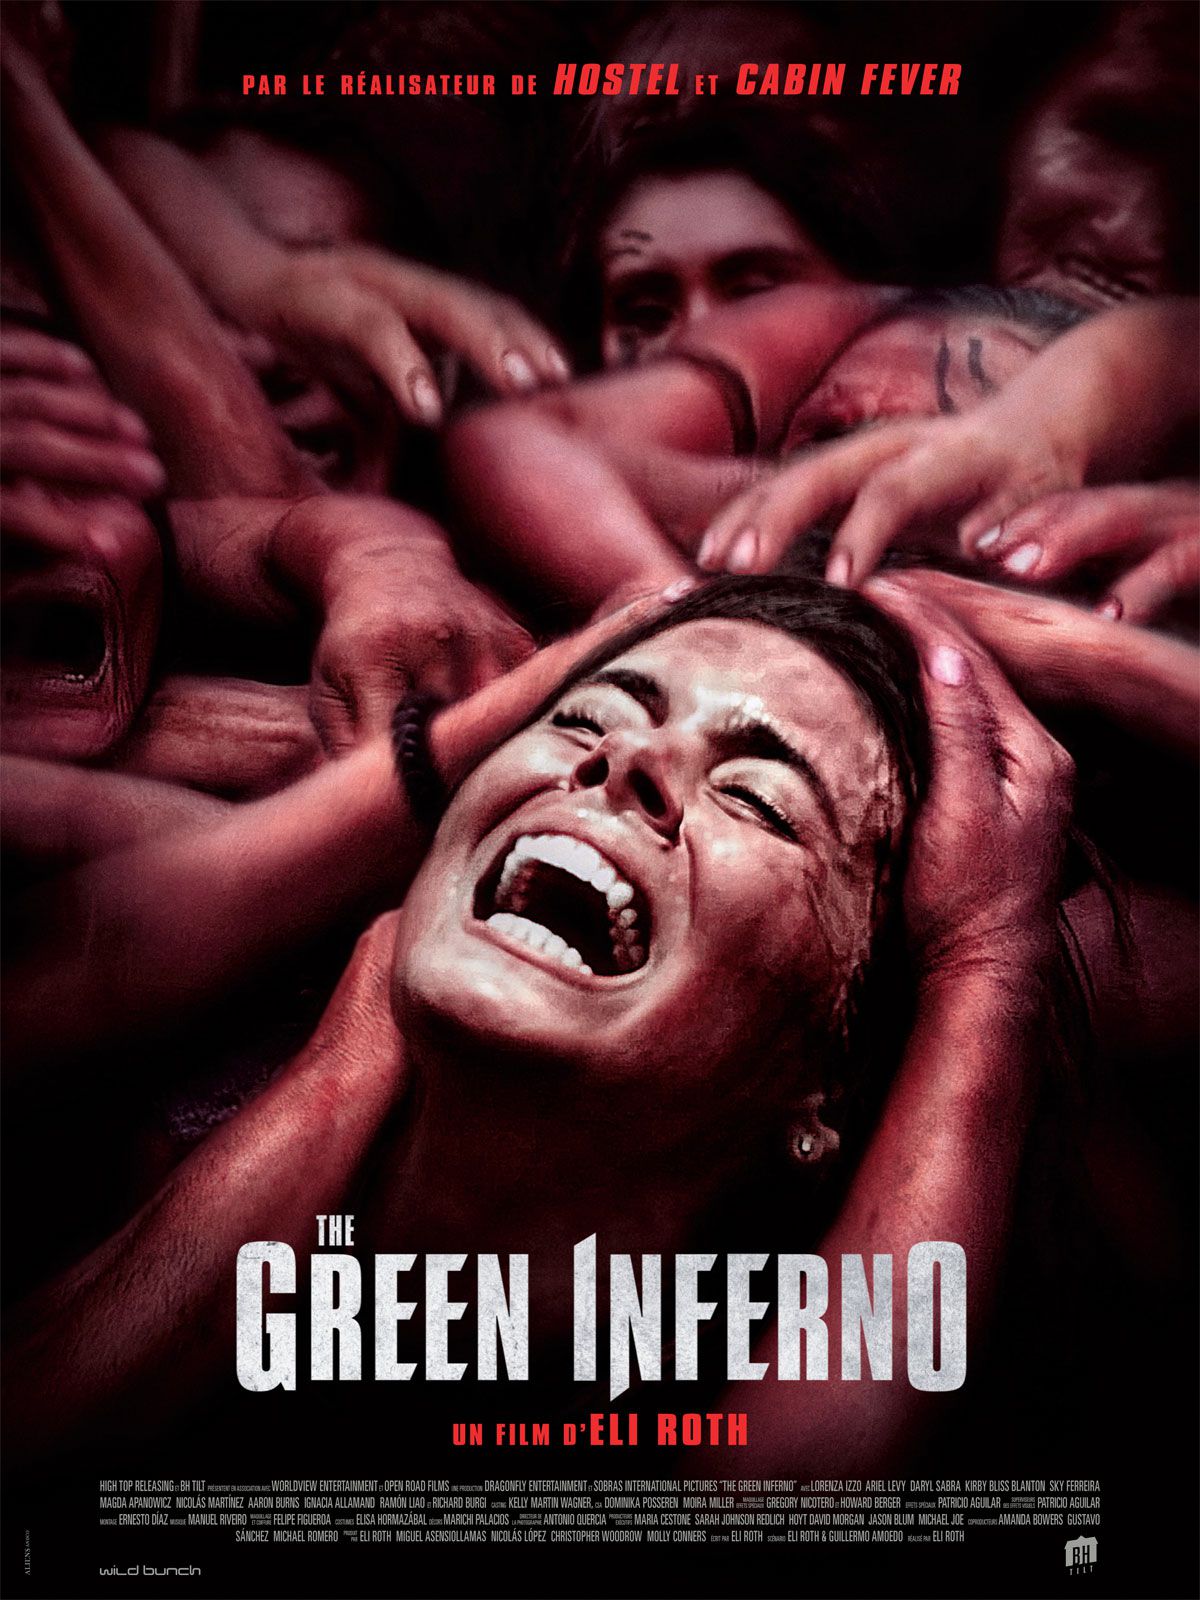 The Green Inferno - Film (2013) streaming VF gratuit complet